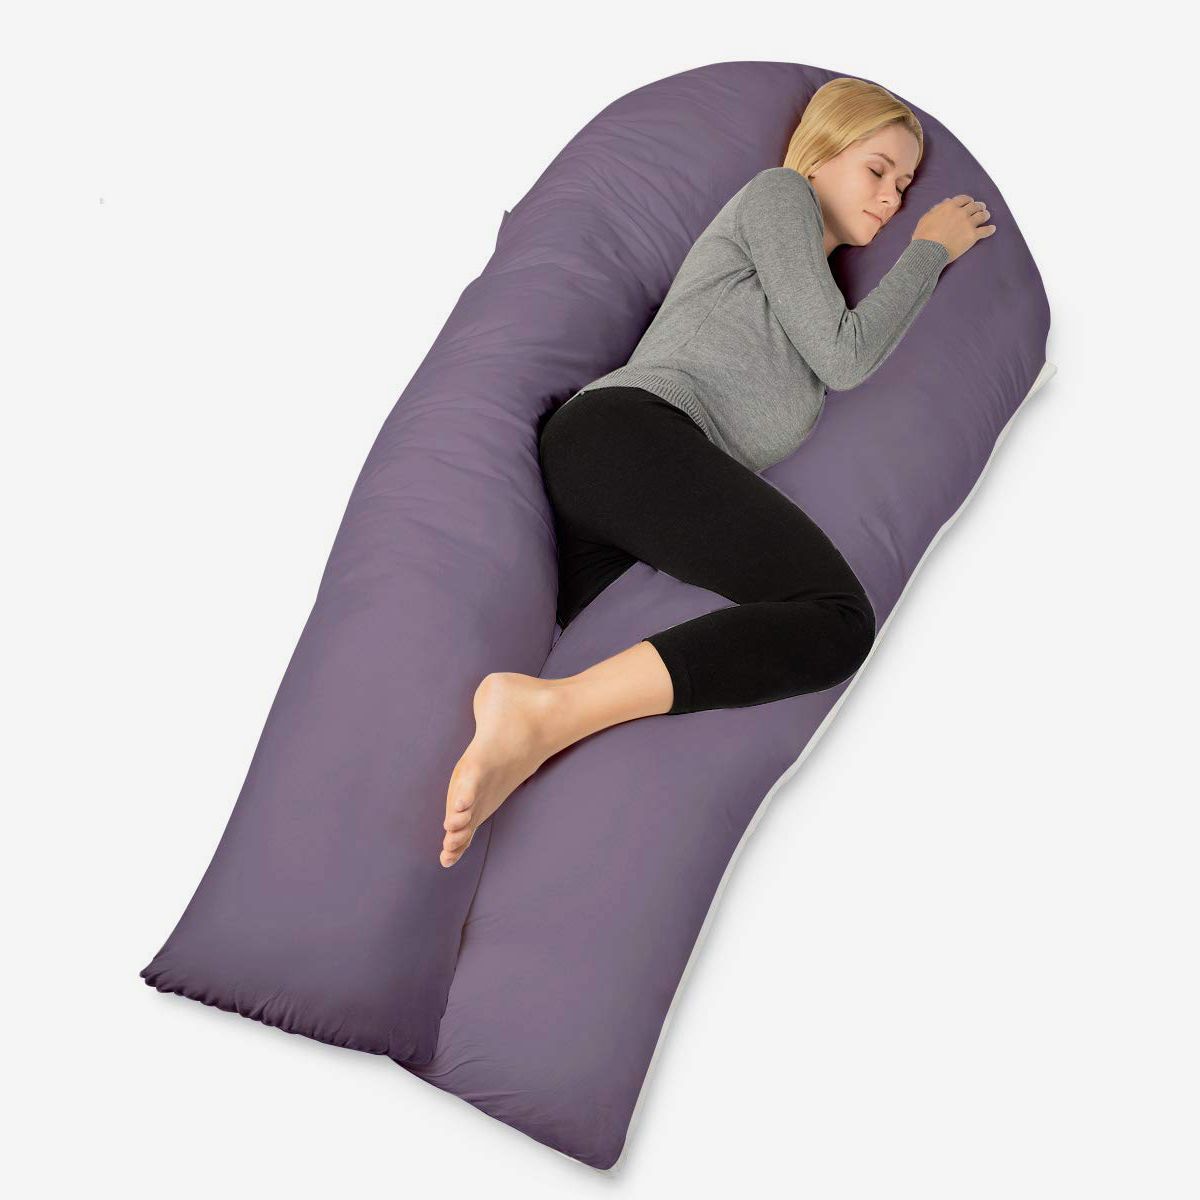 body pillow for couch